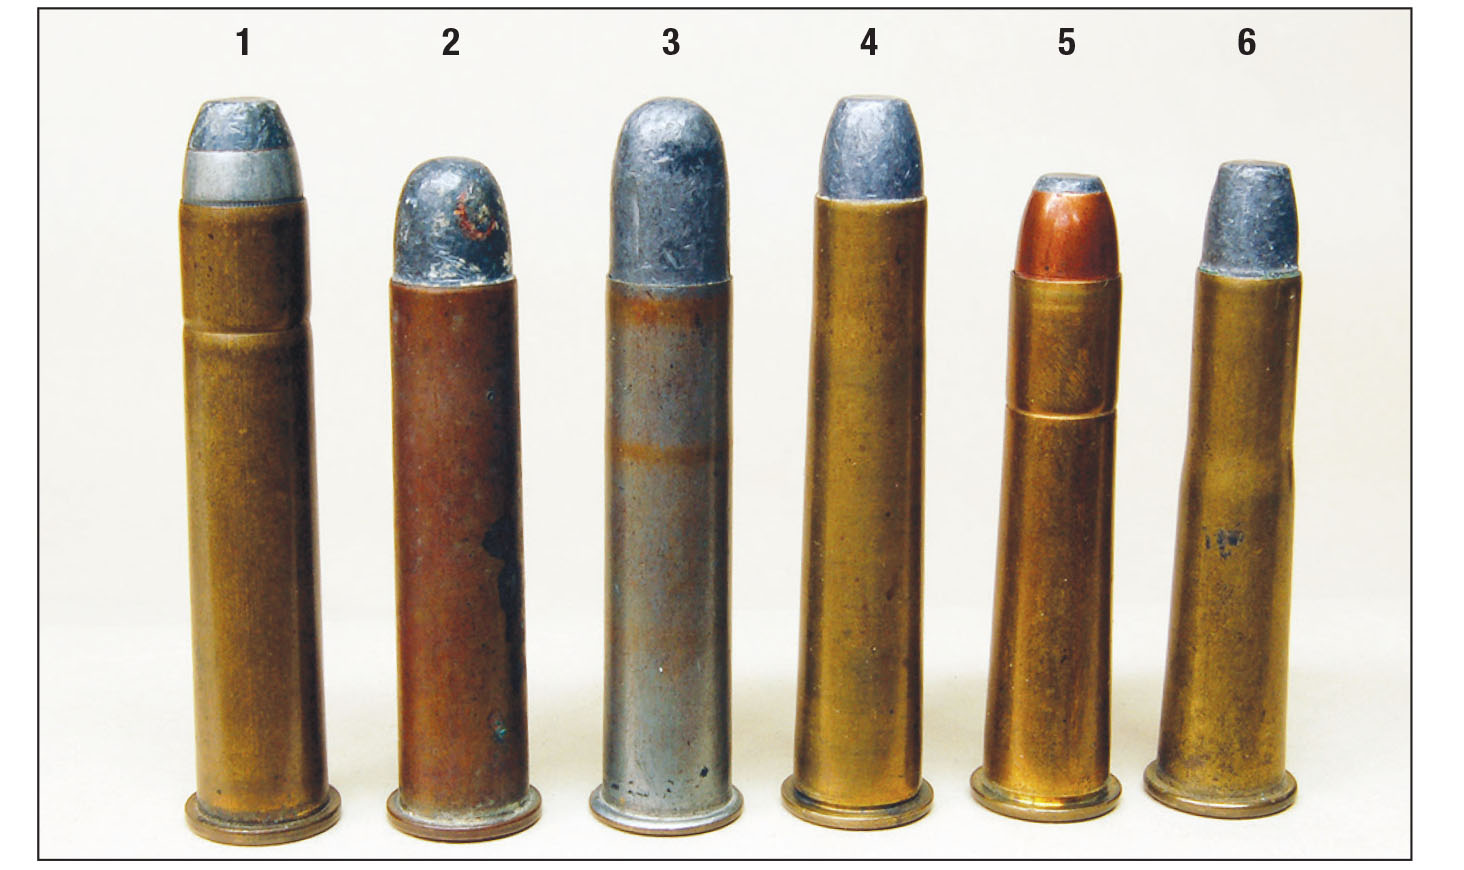 Cartridges first chambered in the Winchester M1886 included: (1) .45-90-300, (2) .45-70-405, (3) .45-70-500, (4) .40-82-260, (5) .40-65-260 and (6) .38-56-255.